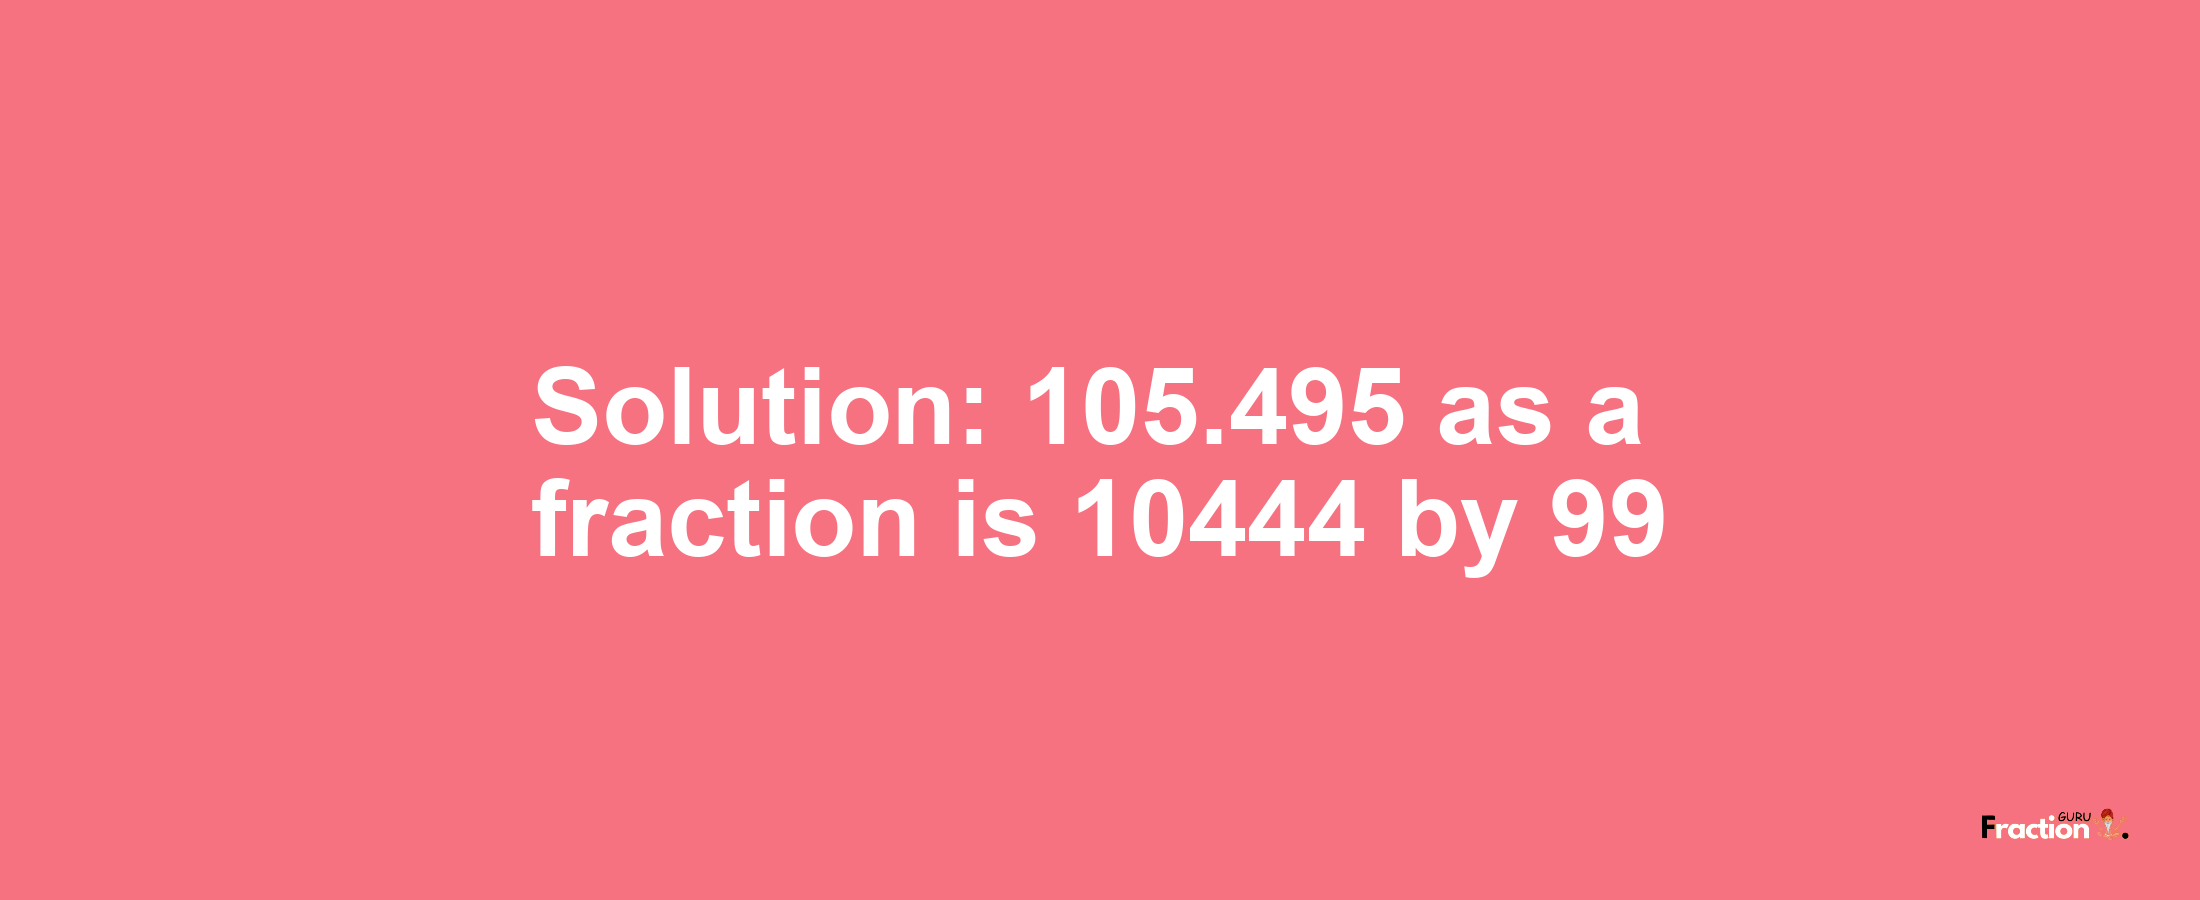 Solution:105.495 as a fraction is 10444/99